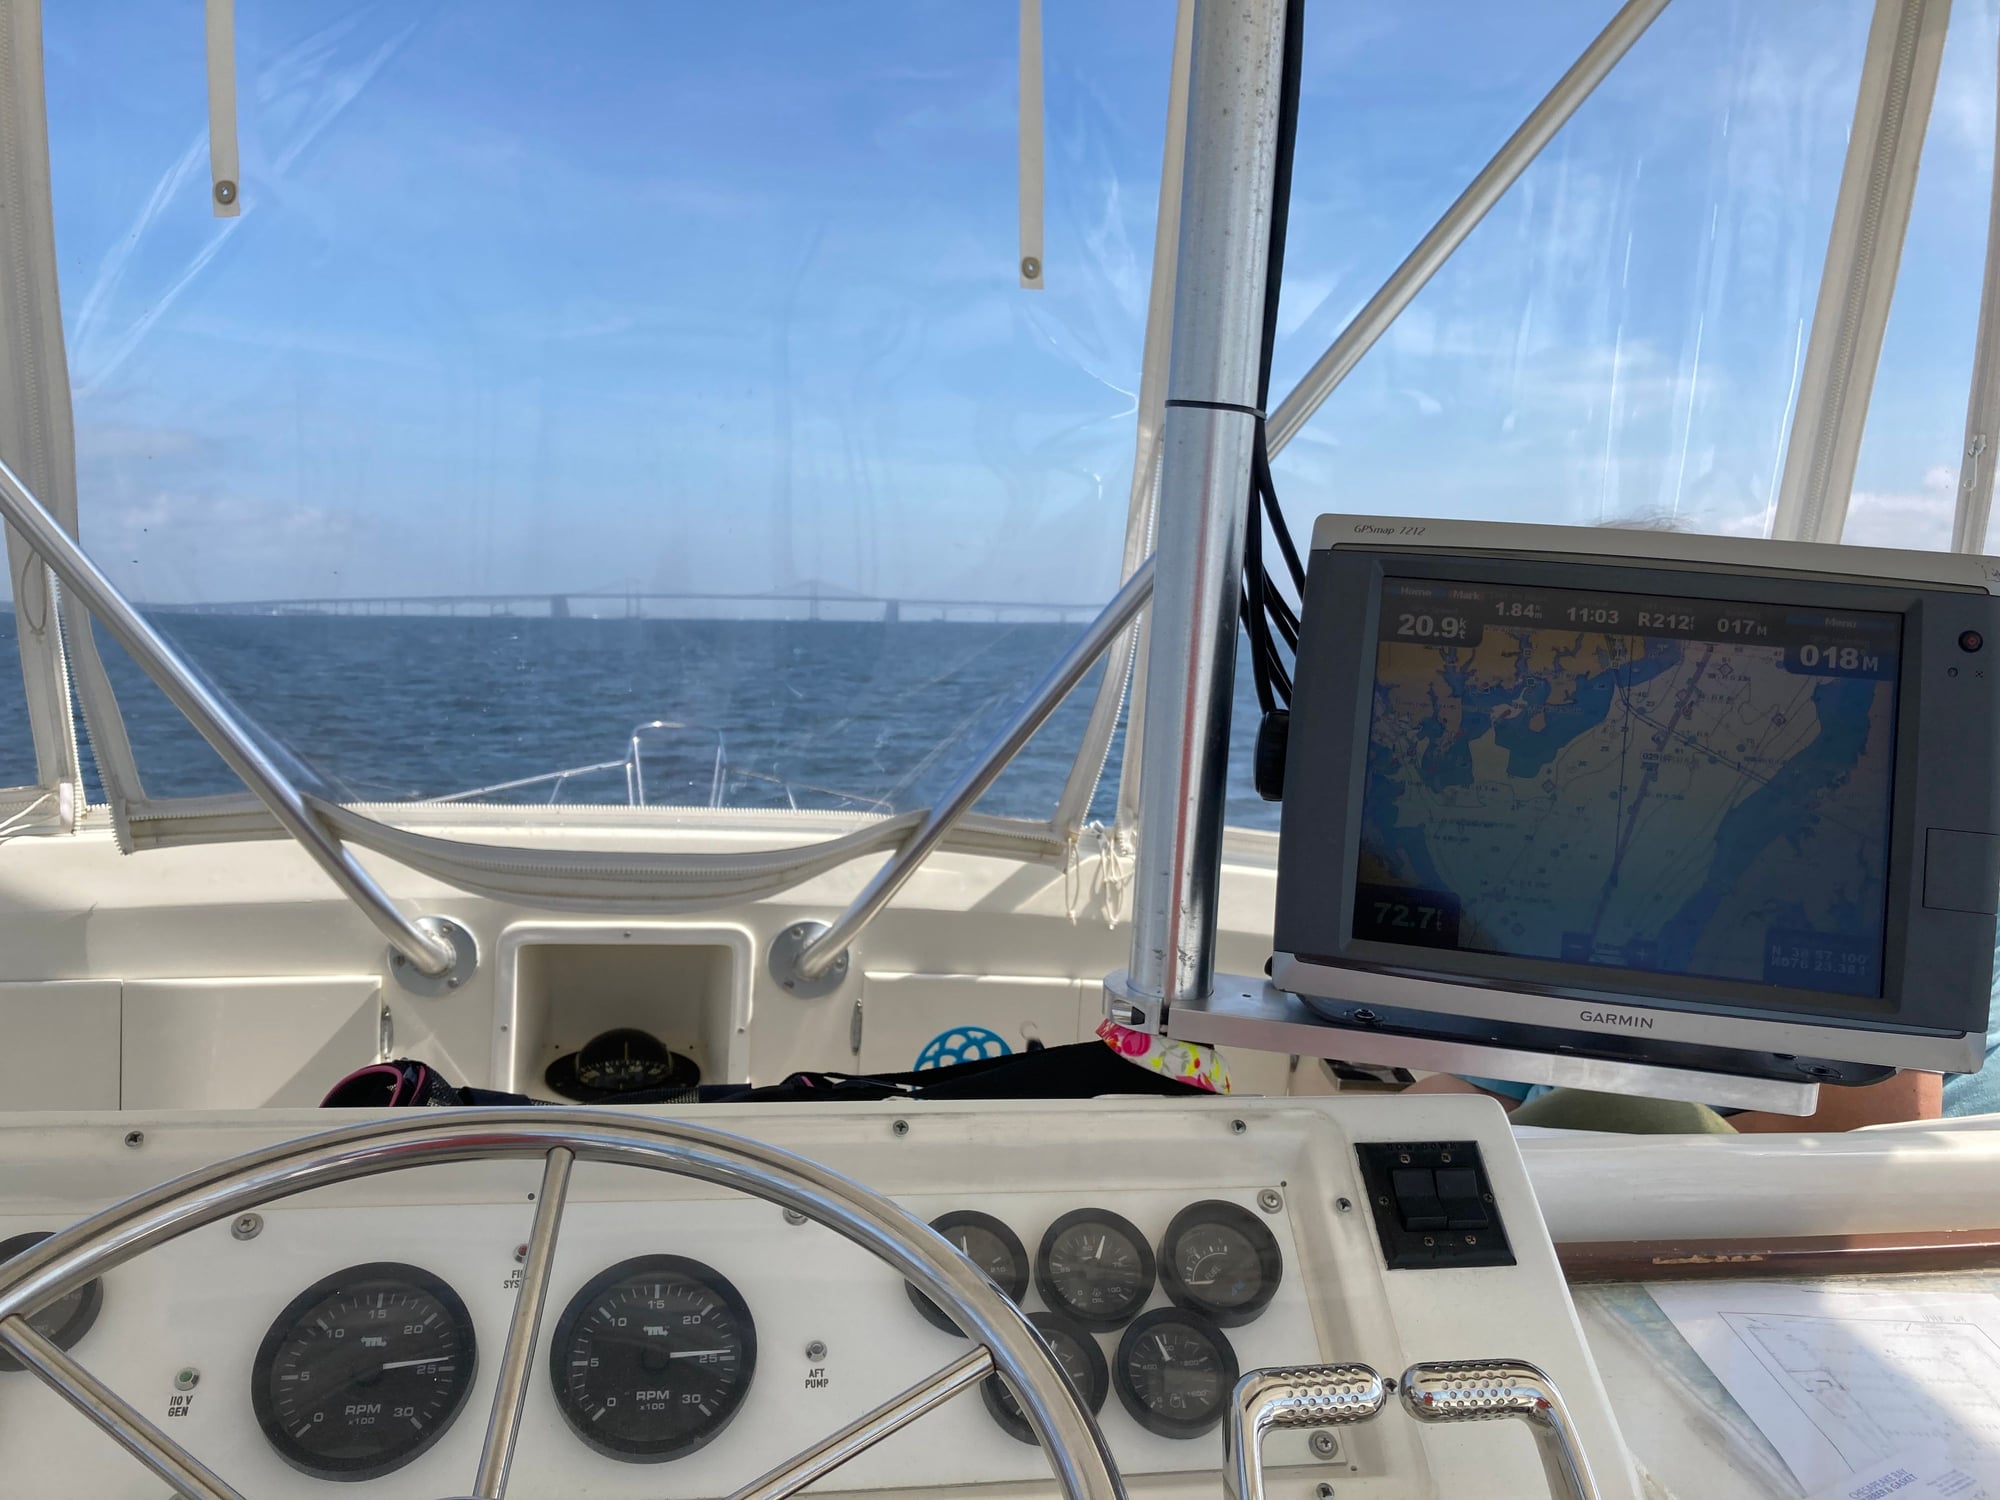 Garmin Autopilot Tech Annapolis MD - The Hull Truth - Boating and